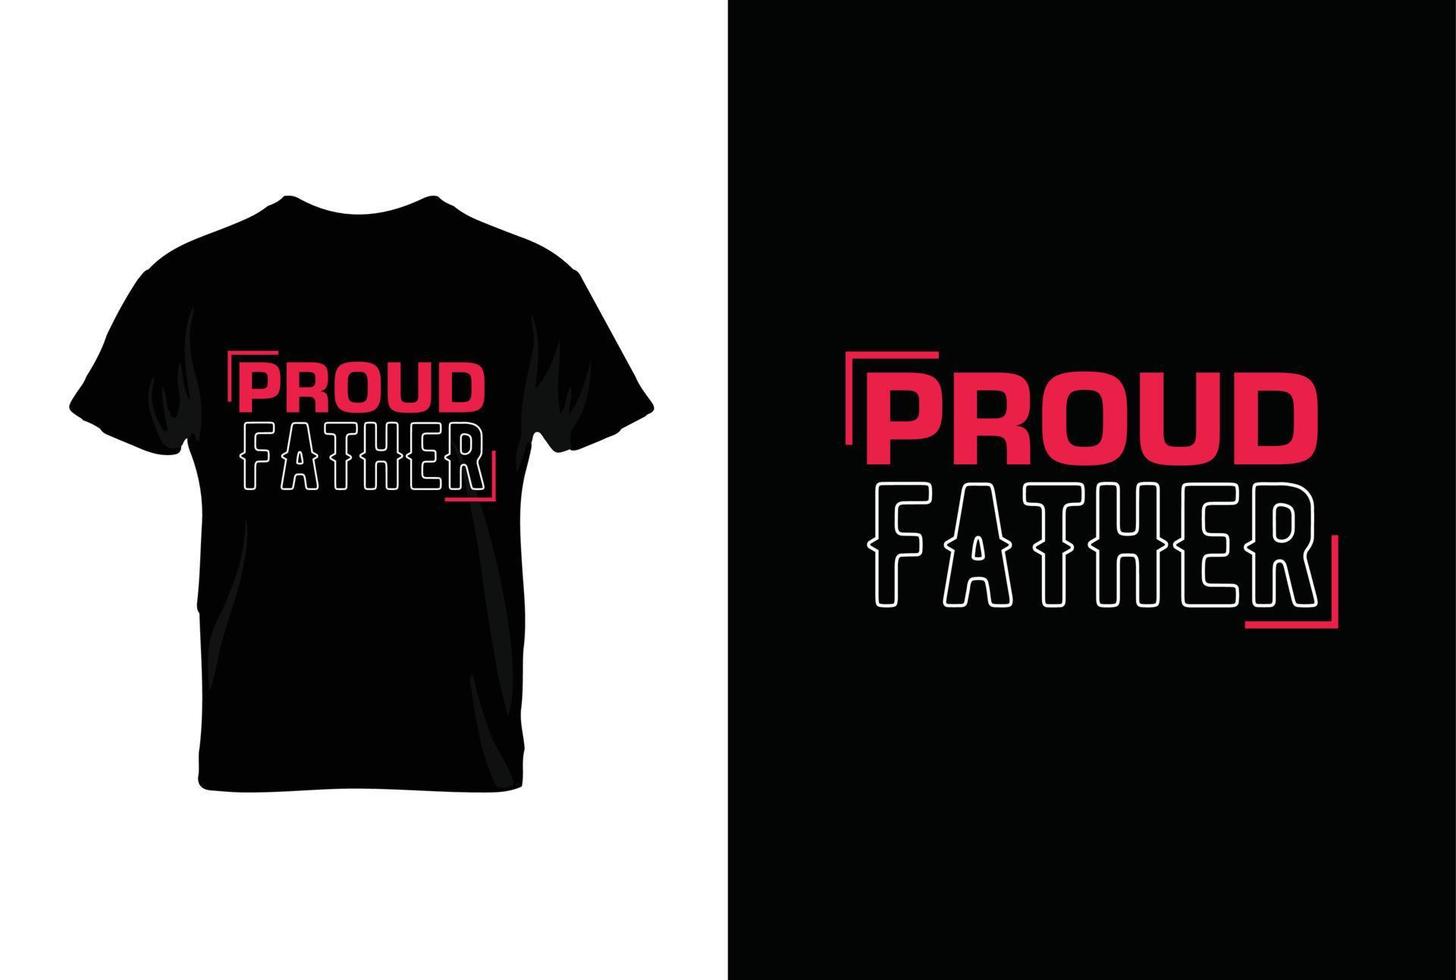 Proud Father. Typography vector father's quote t-shirt design